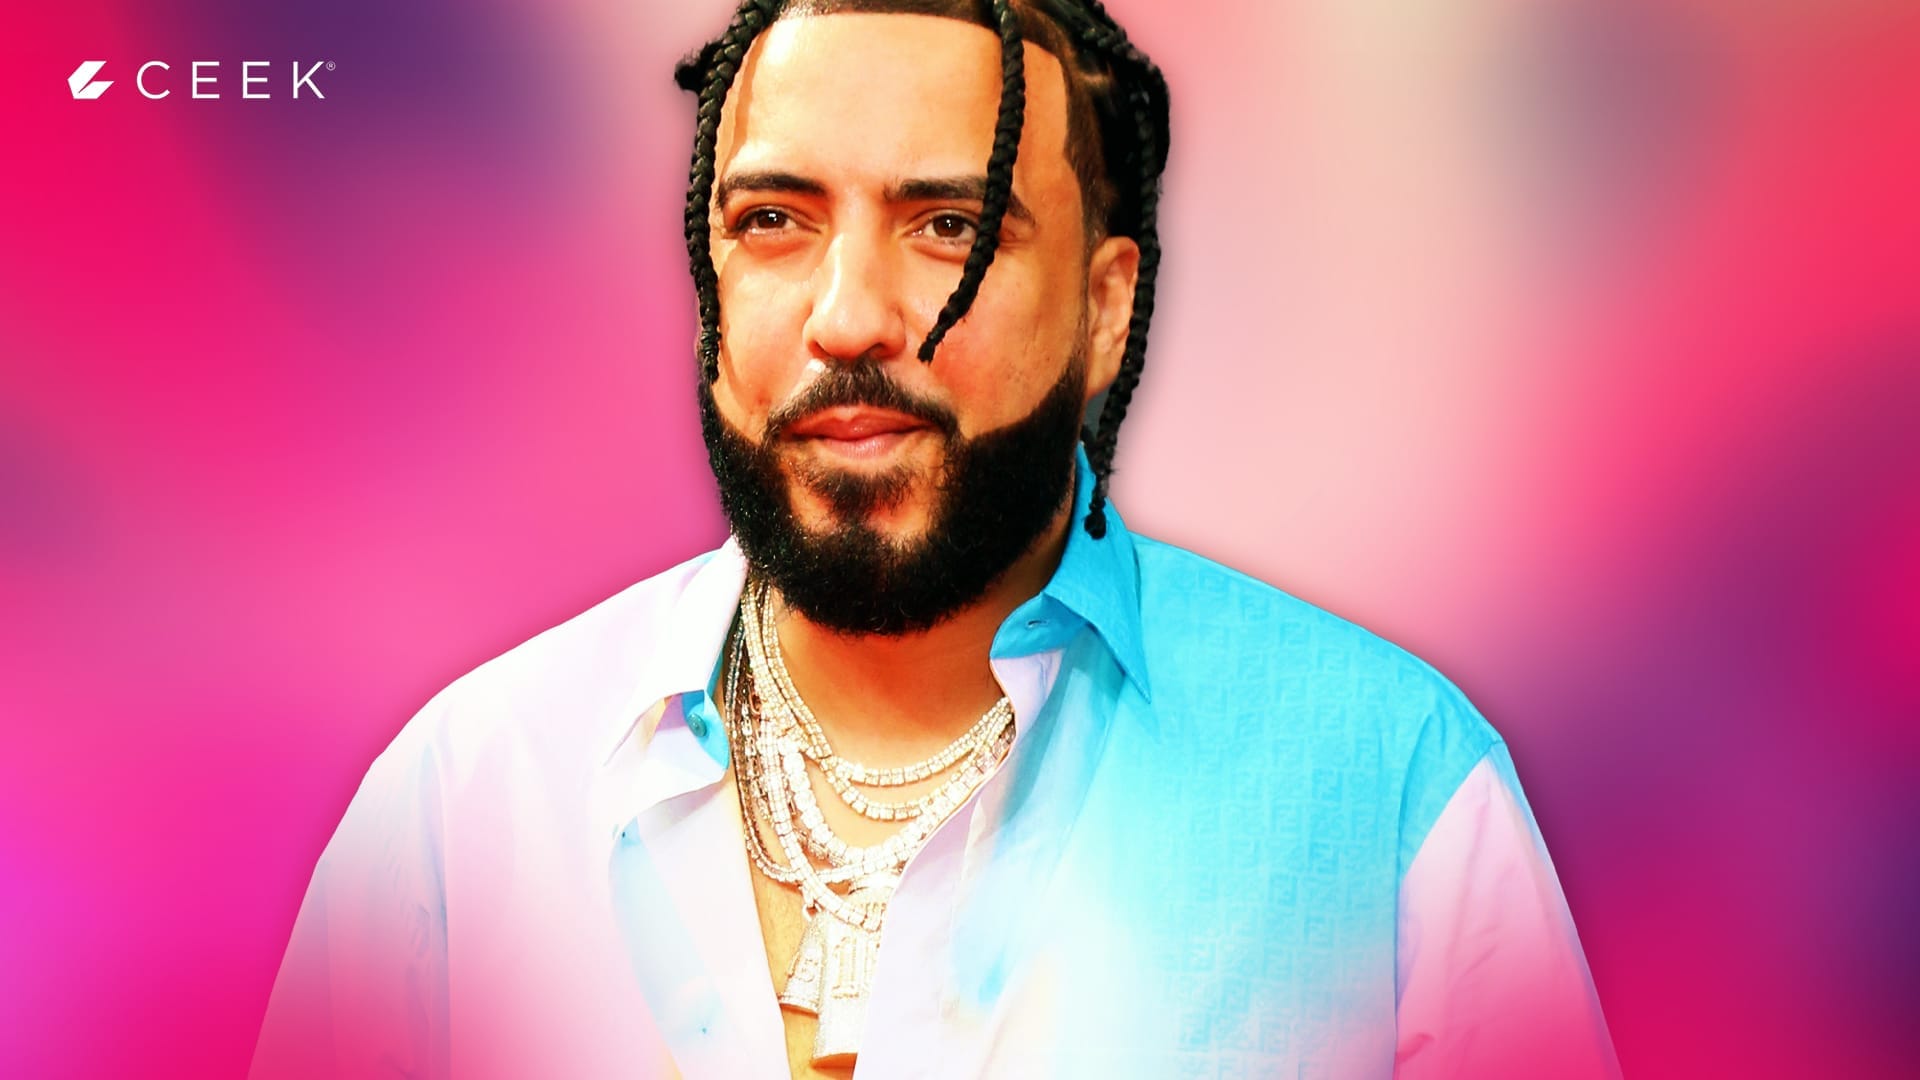 French Montana songs and videos - CEEK.com